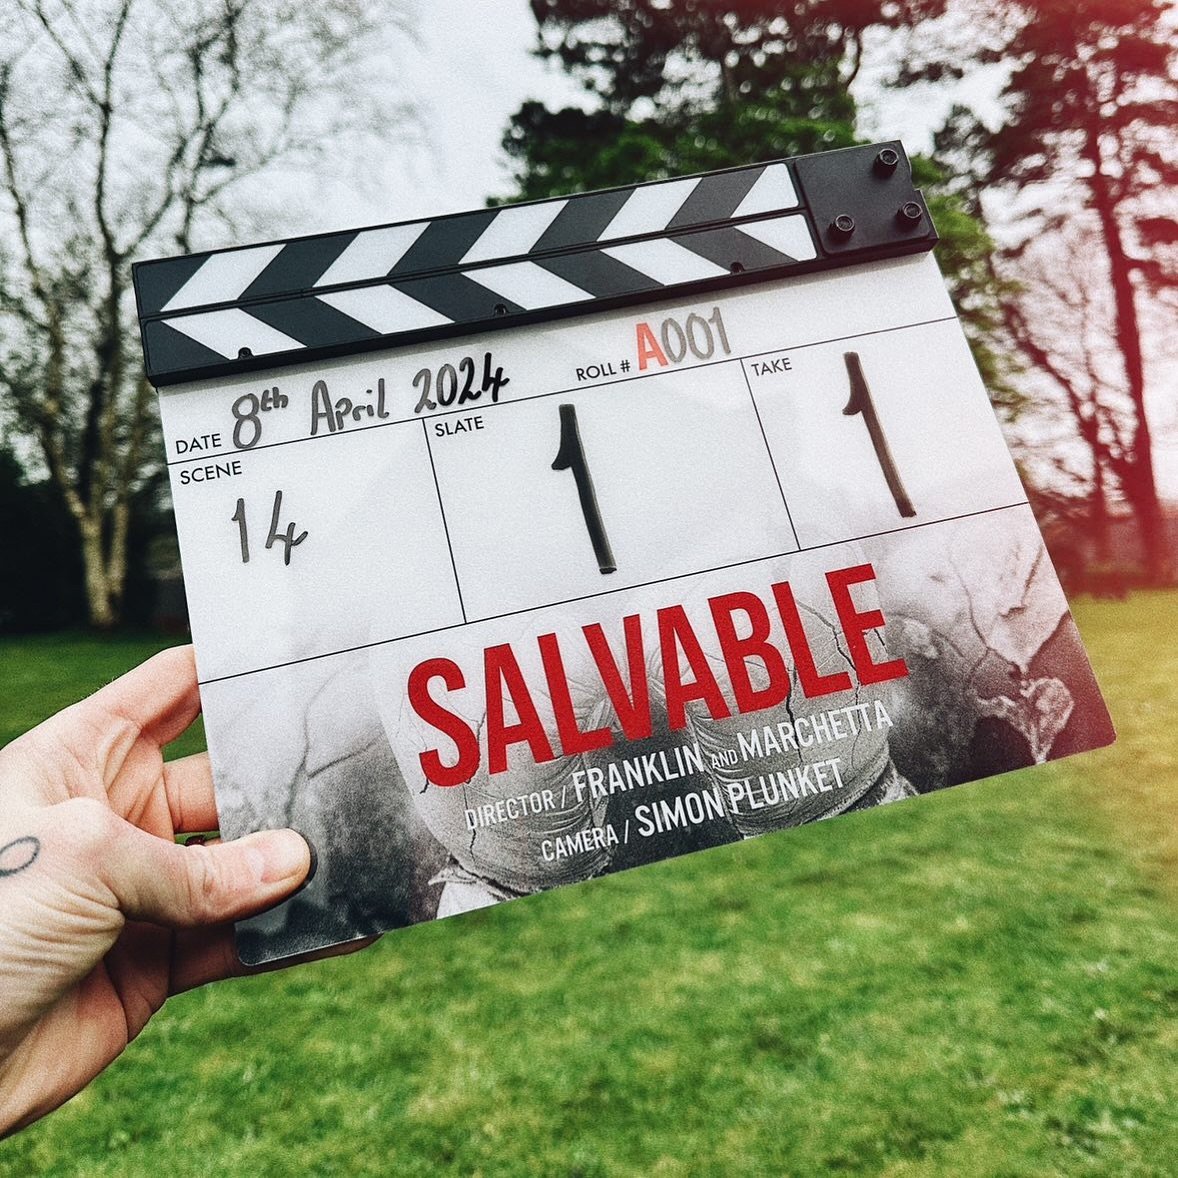 That's a wrap! Boxing drama Salvable, finished filming in the Vale, this week. We hope Shia LeBeouf, Toby Kebbell, James Cosmo, Michael Socha and cast and crew, enjoyed their time with us. Can’t wait to see the film when it’s released. @lowkeyfilms @bjornfranklin